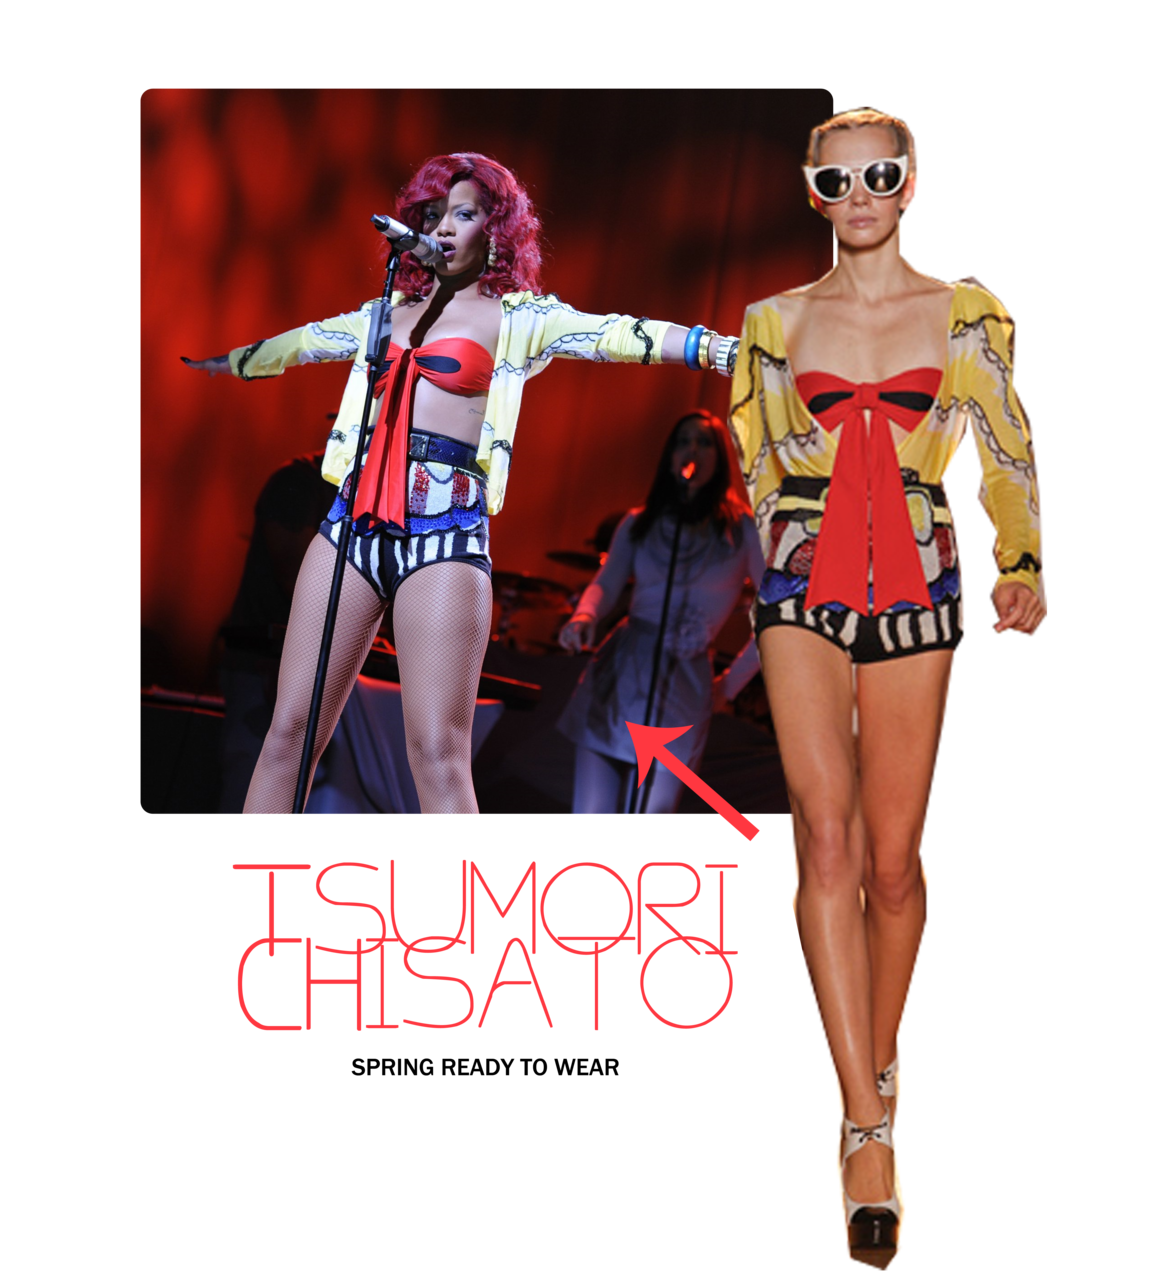 During an appearance on the Saturday night live show Rihanna wore designer  Tsumori Chisato from the Spring ready to wear collection.